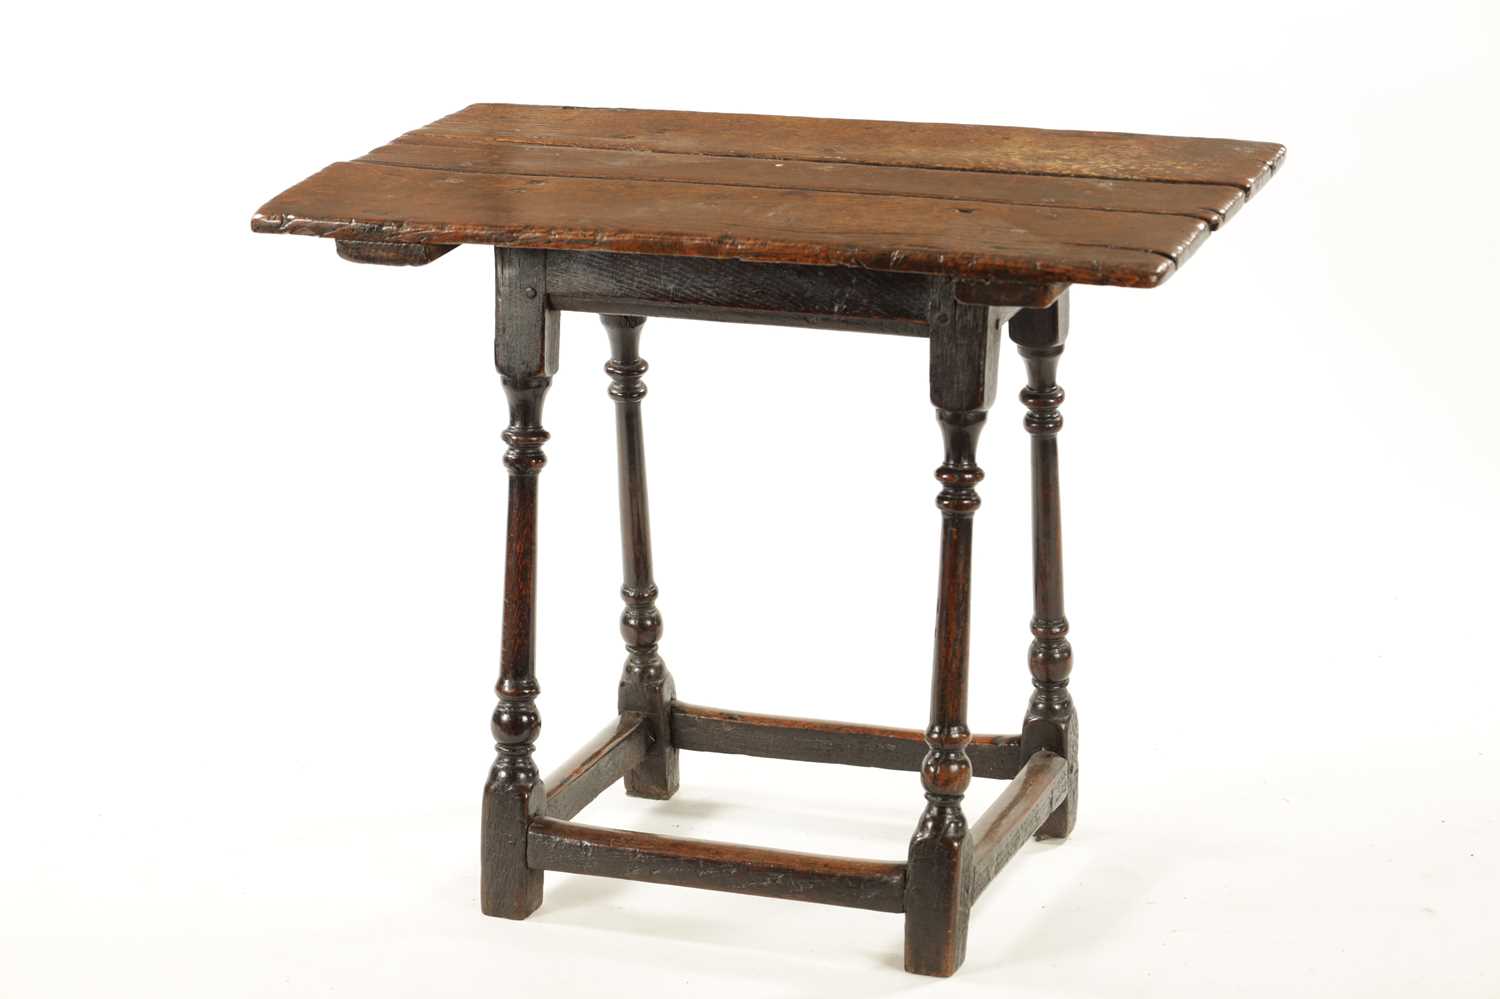 A LATE 17TH CENTURY OAK RECTANGULAR SMALL TABLE - Image 2 of 6